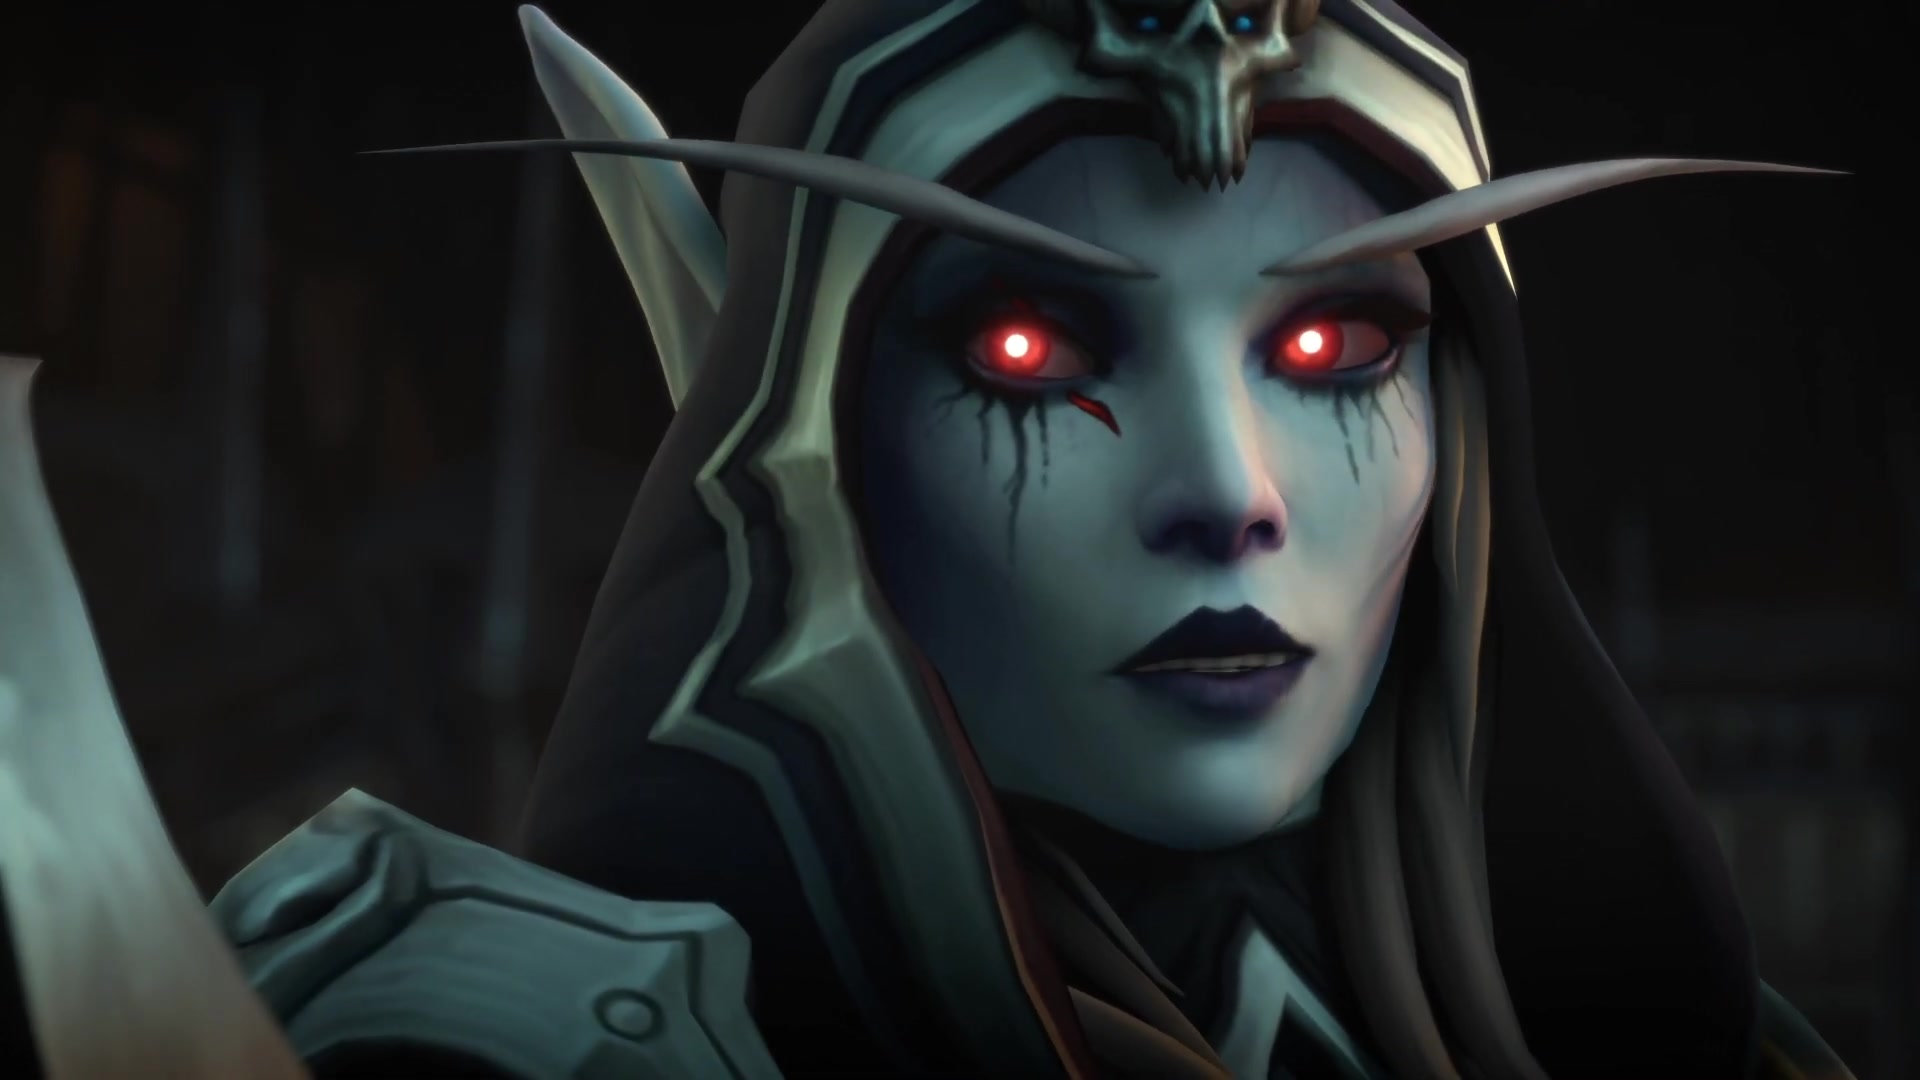 World of Warcraft: Shadowlands - Sylvanas Windrunner, an undead elf with bright red eyes, speaks to a figure off-camera with a hopeful expression.